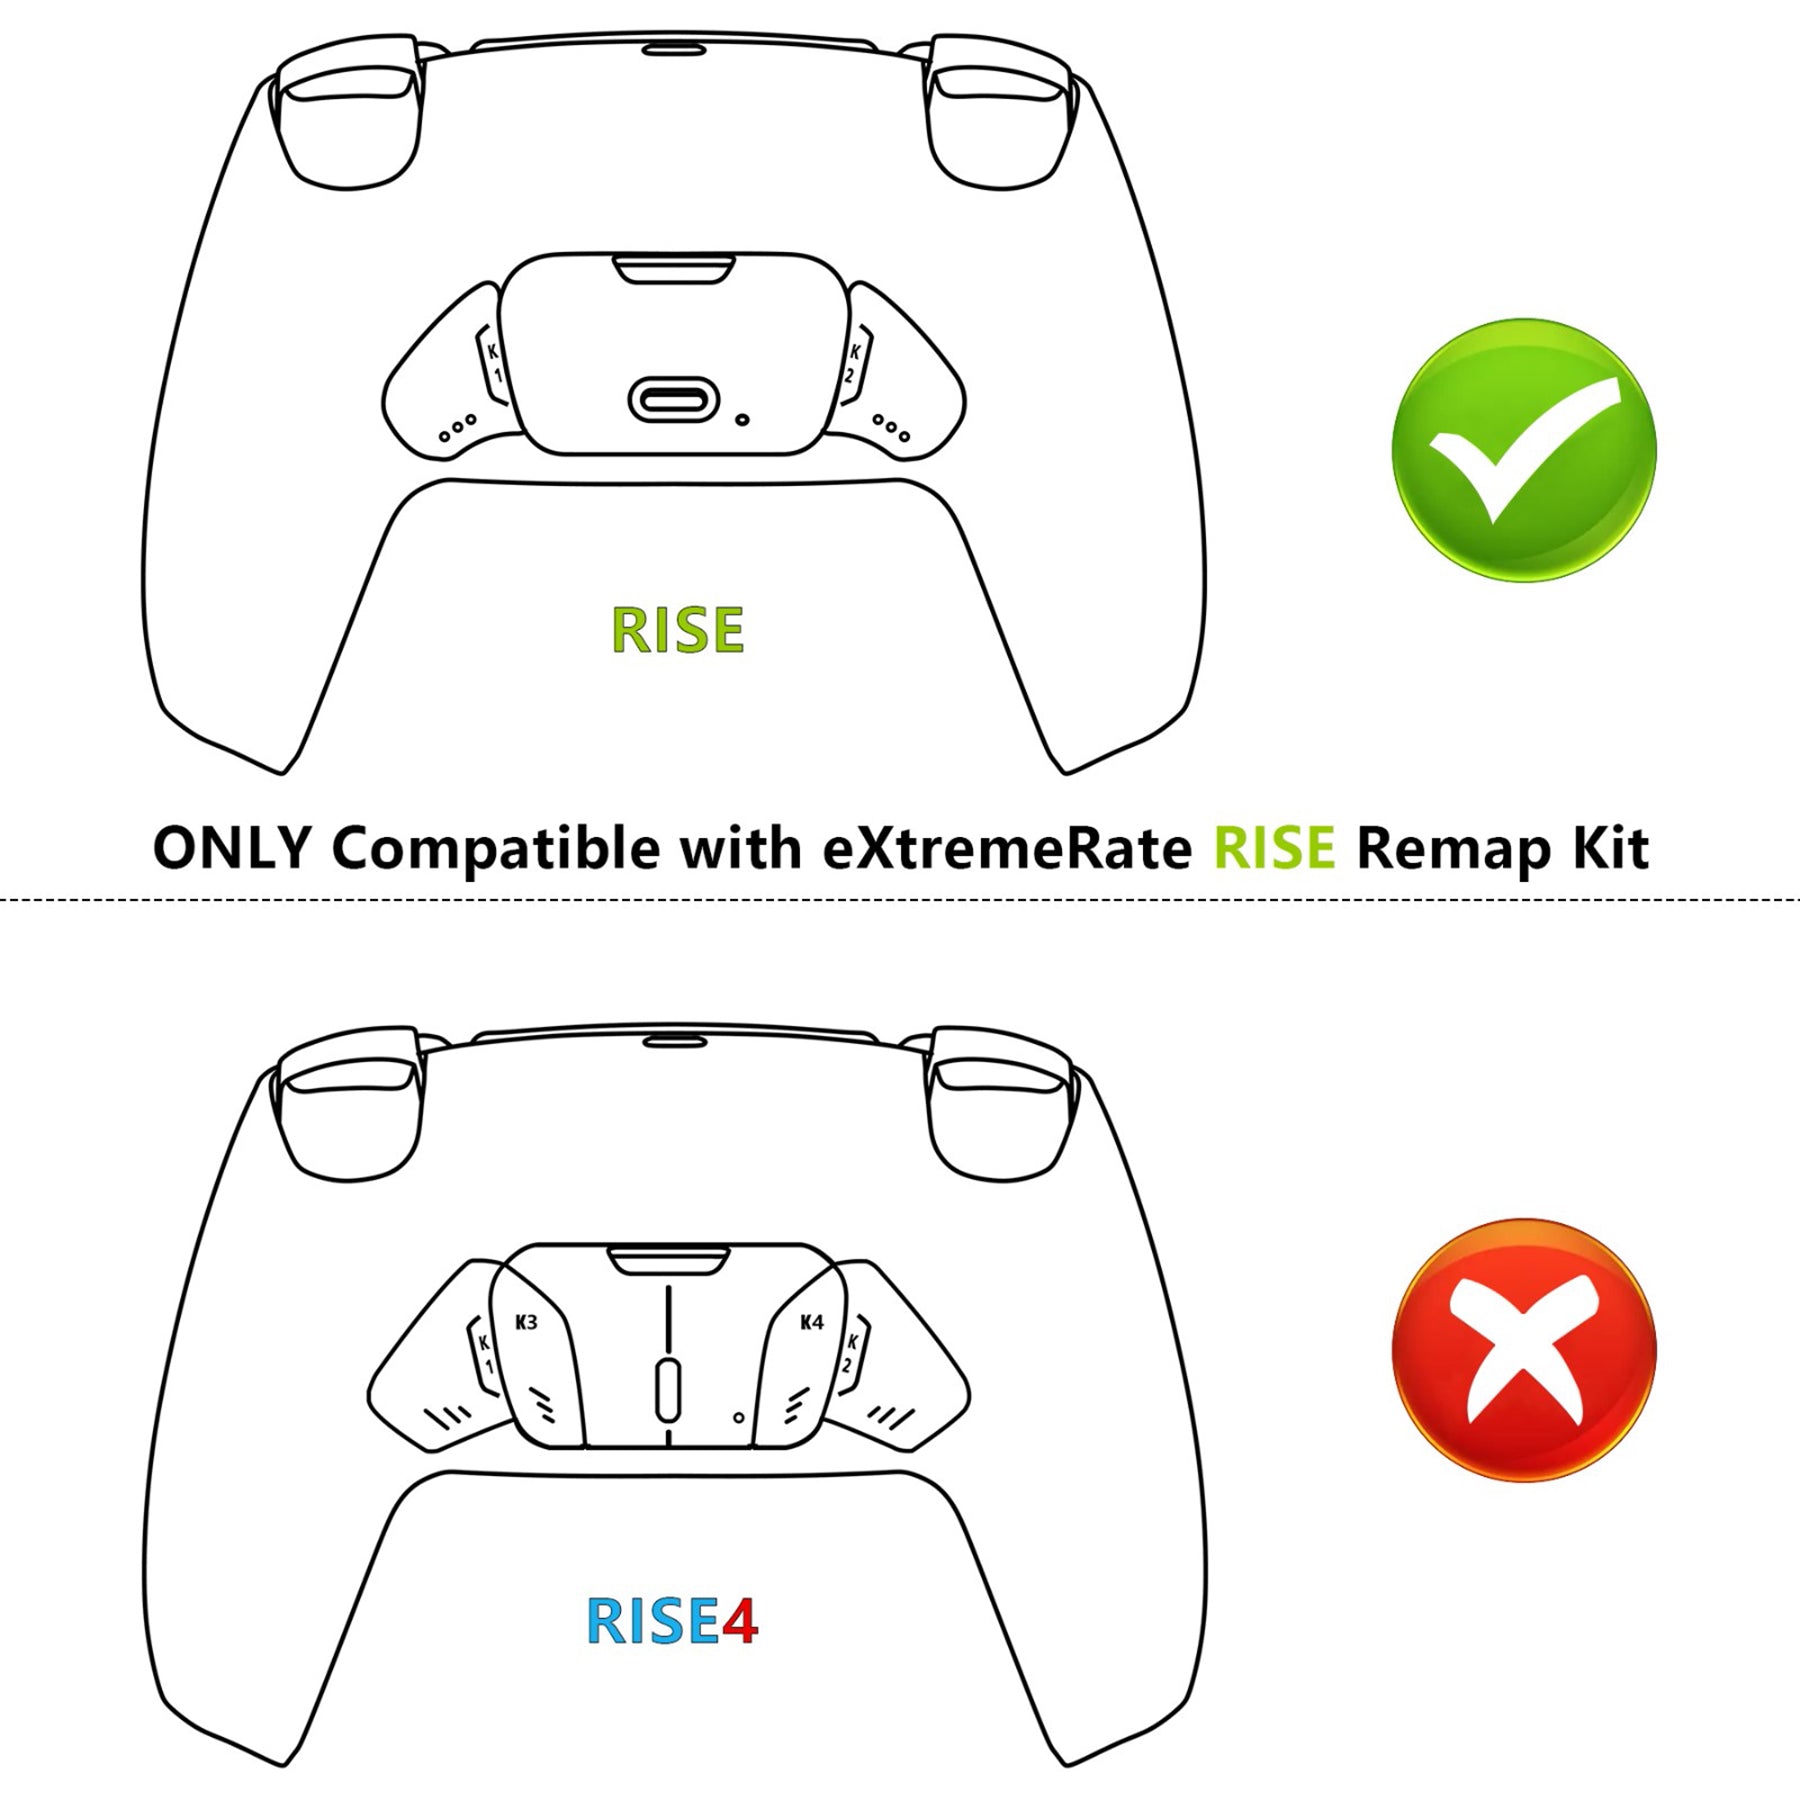 eXtremeRate Replacement Redesigned K1 K2 Back Buttons for eXtremerate RISE Remap Kit, Compatible with PS5 Controller - Chrome Gold eXtremeRate